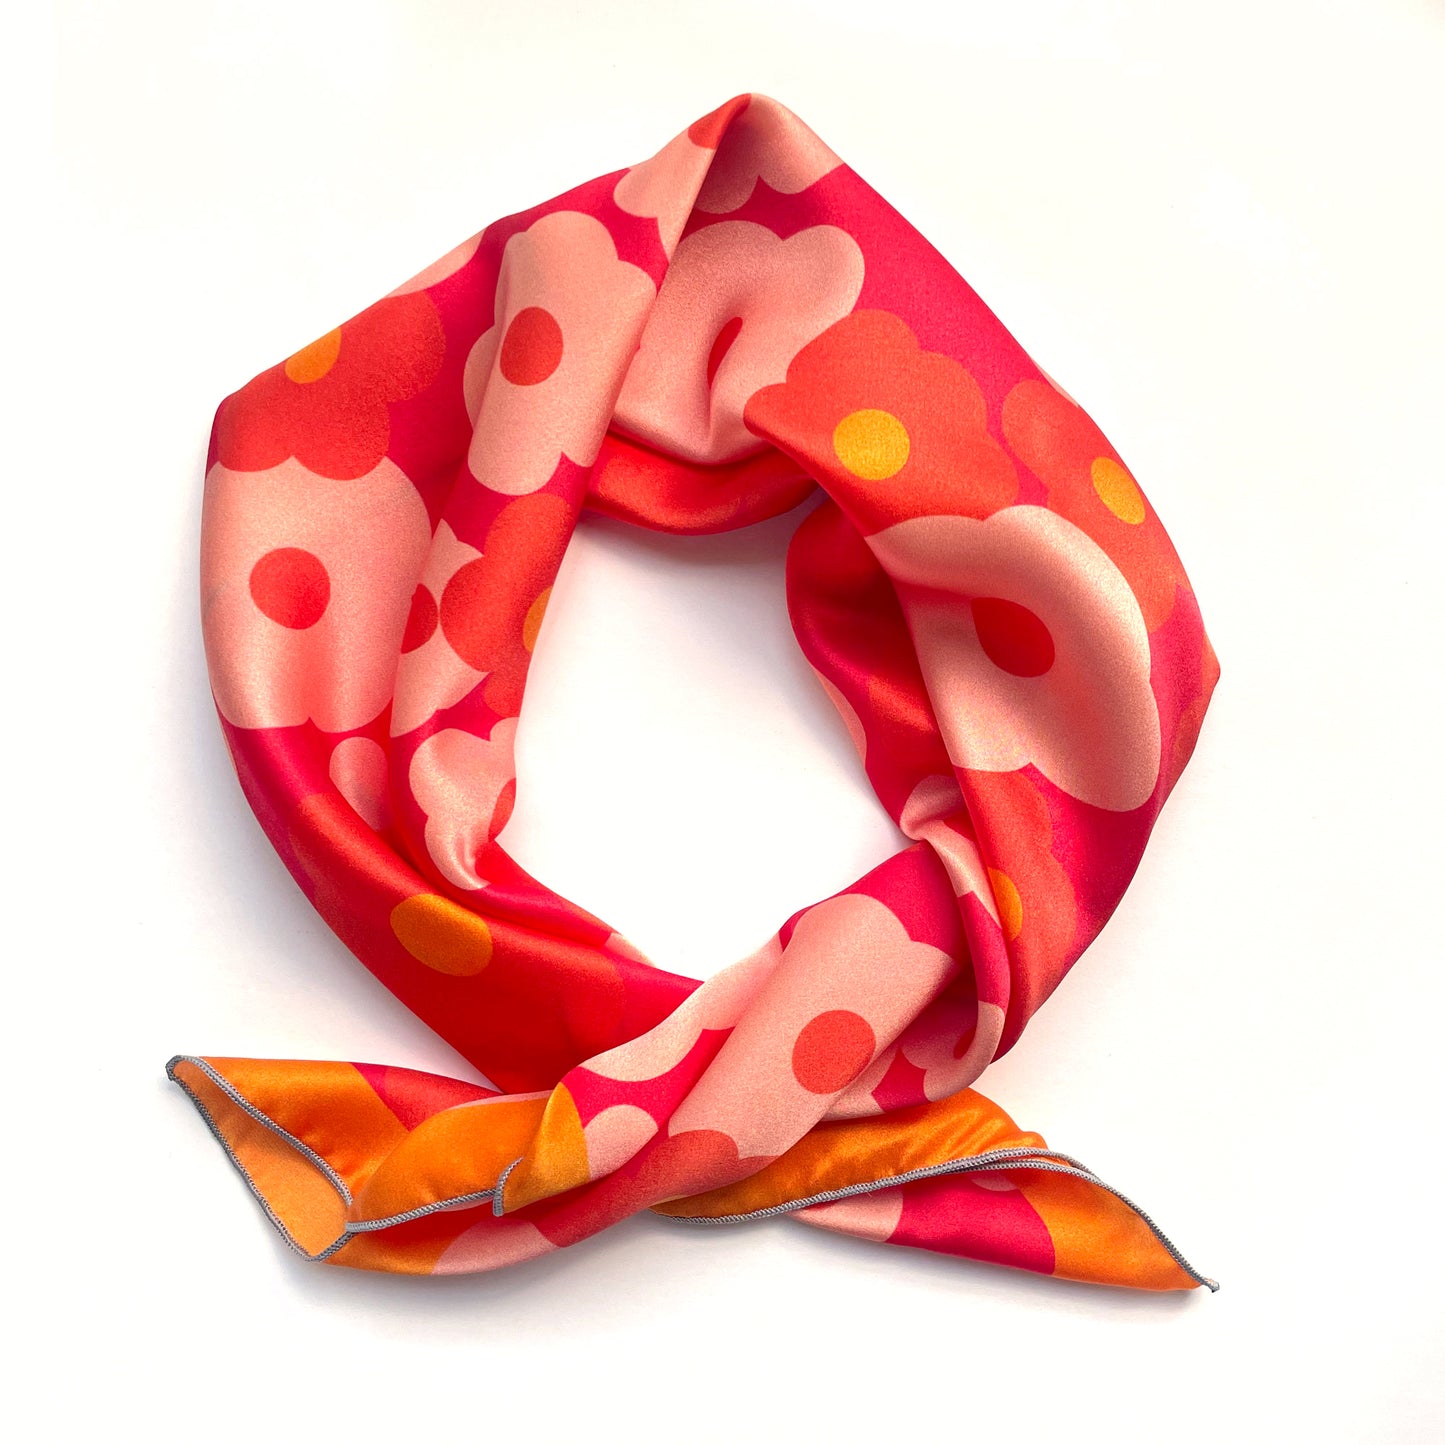 Cheerful pink, red, and orange flowers will brighten your mood and your look - wear as a neck scarf, hair scarf or accessorize as you like with this retro floral print